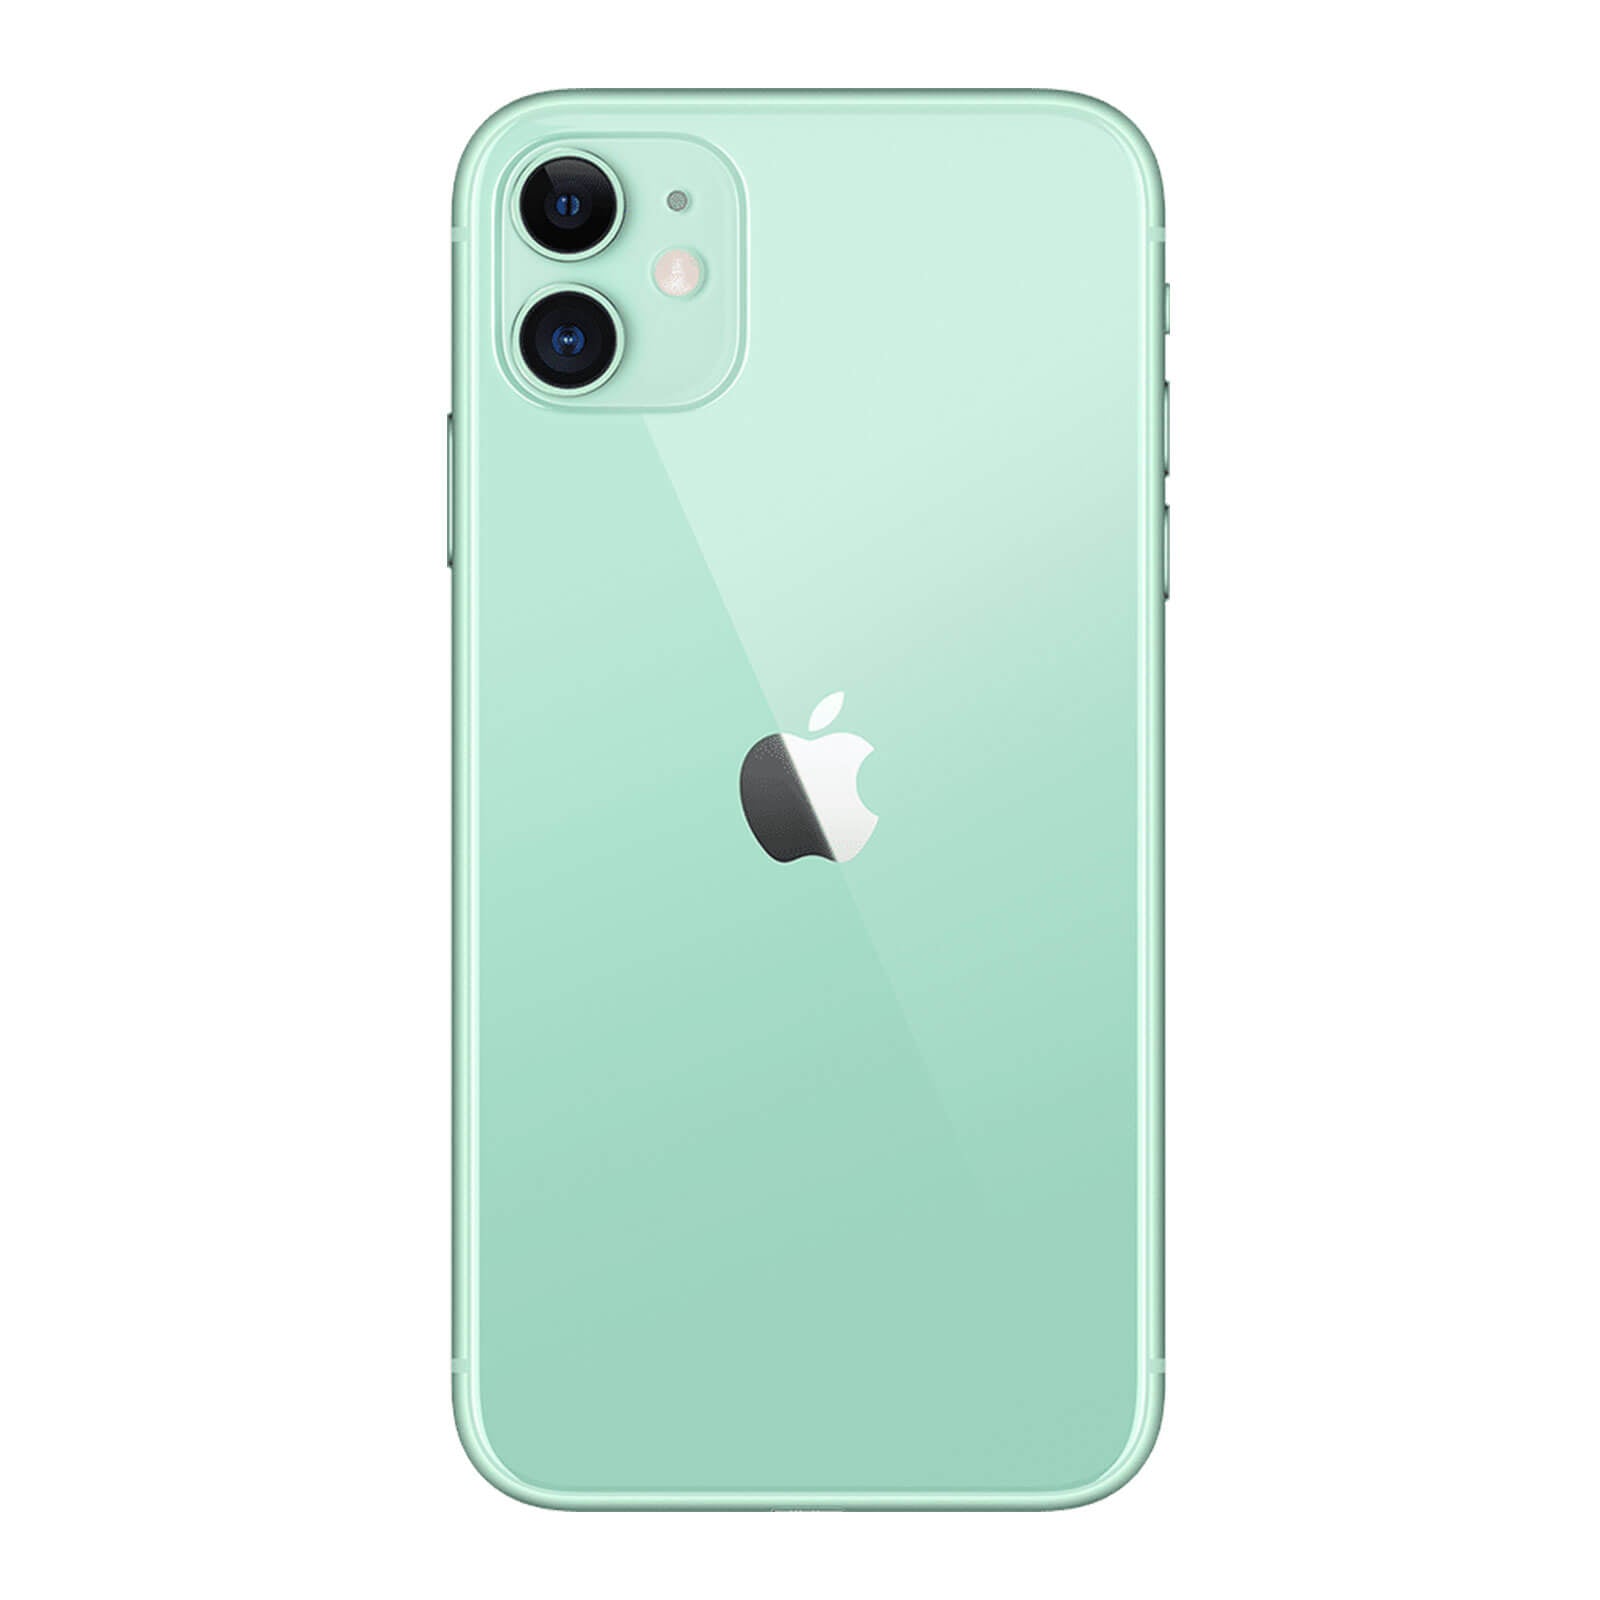 Apple iPhone 11 64GB Green Good - T-Mobile